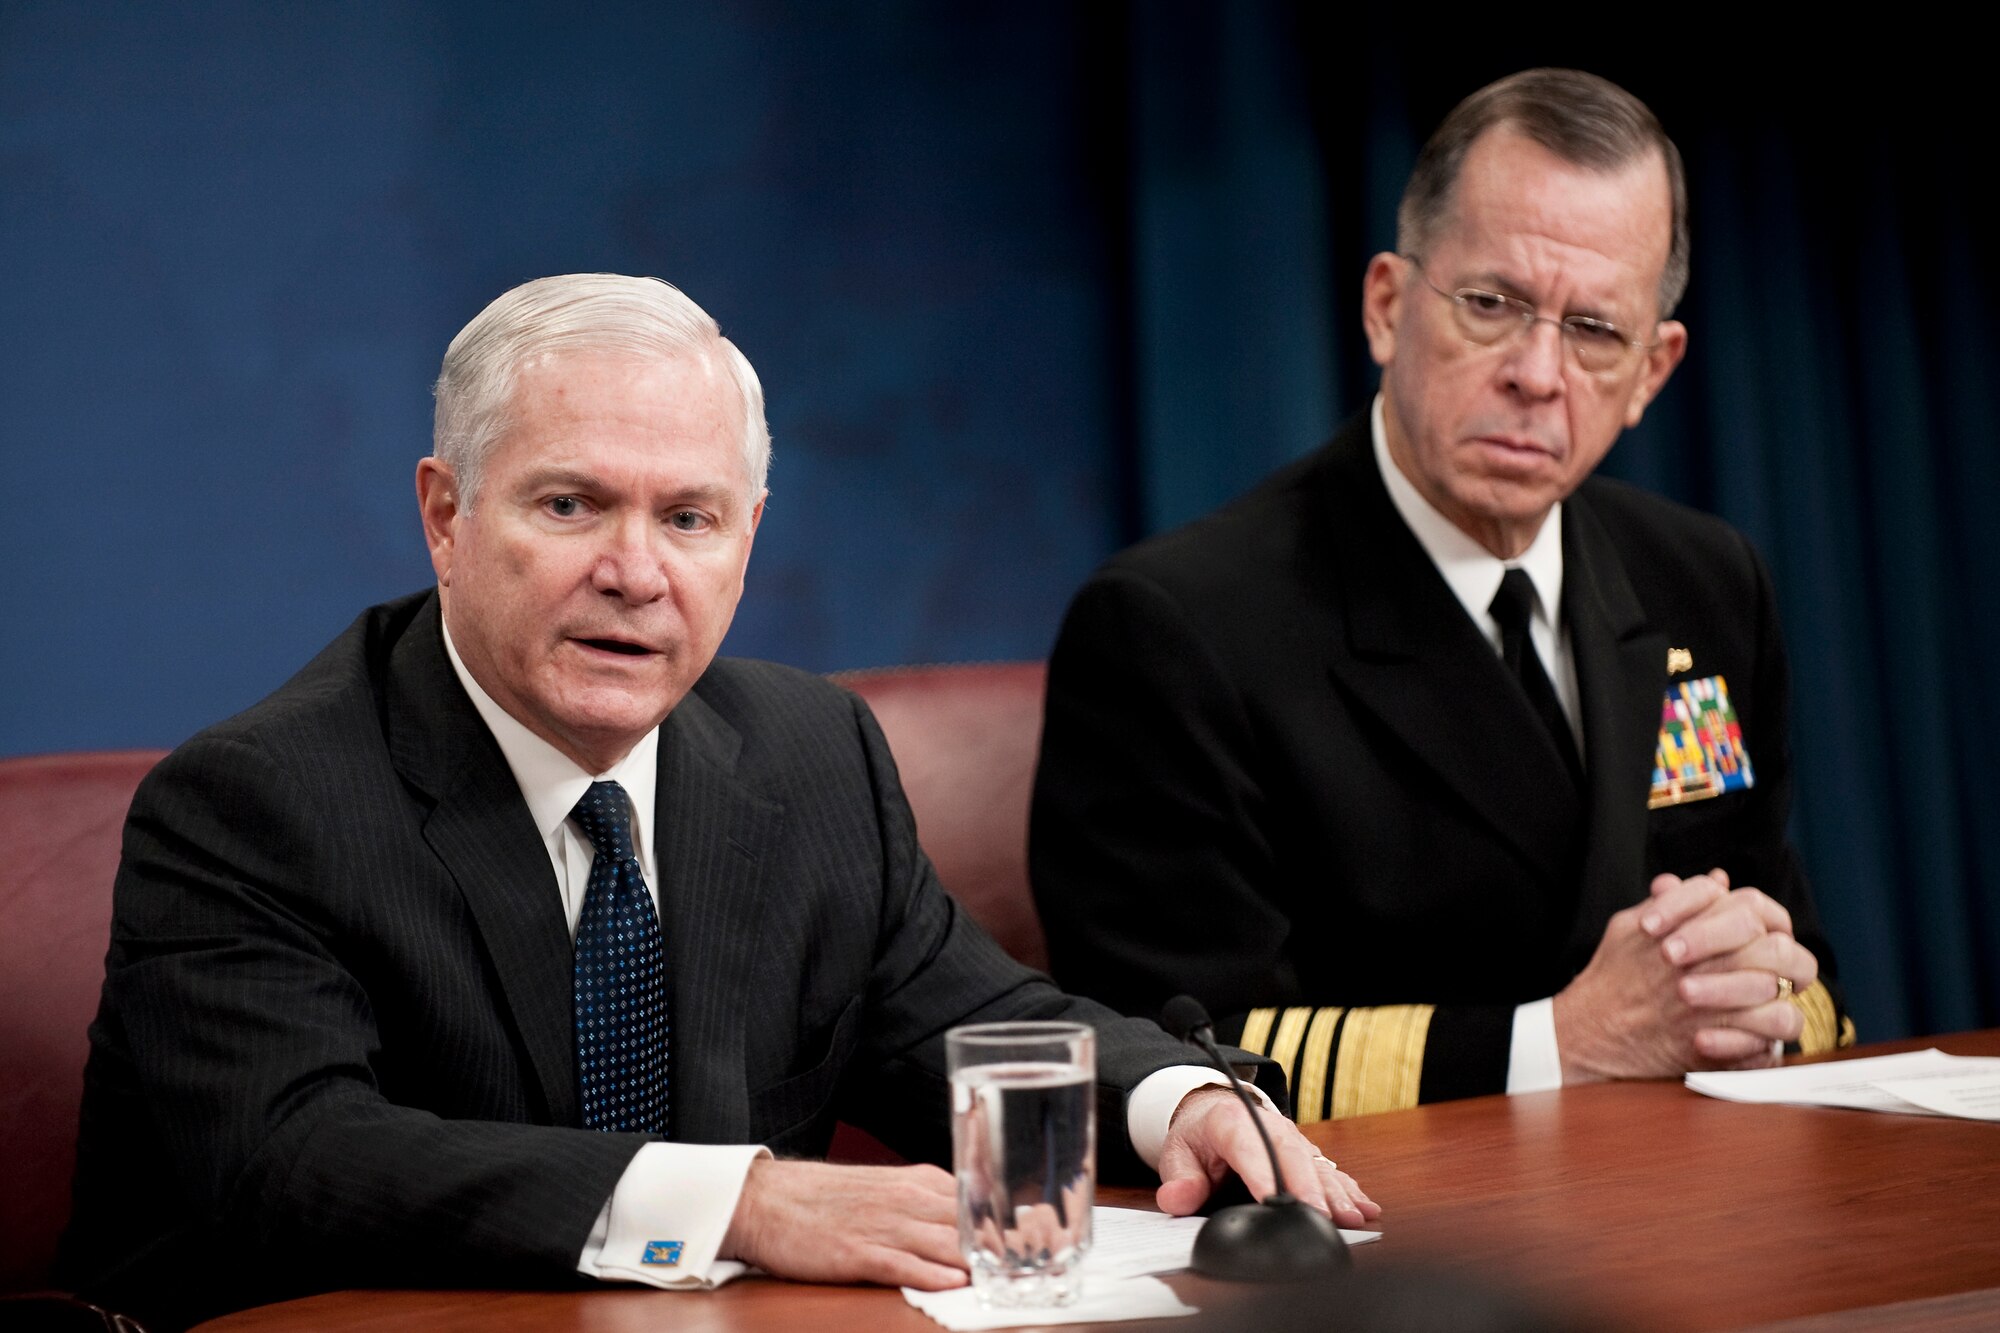 Defense Secretary Robert M. Gates and Navy Adm. Mike Mullen, chairman of the Joint Chiefs of Staff, address the media at the Pentagon, Jan. 15, 2010. Secretary Gates and Admiral Mullen were discussing the Haiti earthquake relief efforts. (Defense Department photo/Petty Officer 1st Class Chad J. McNeeley)